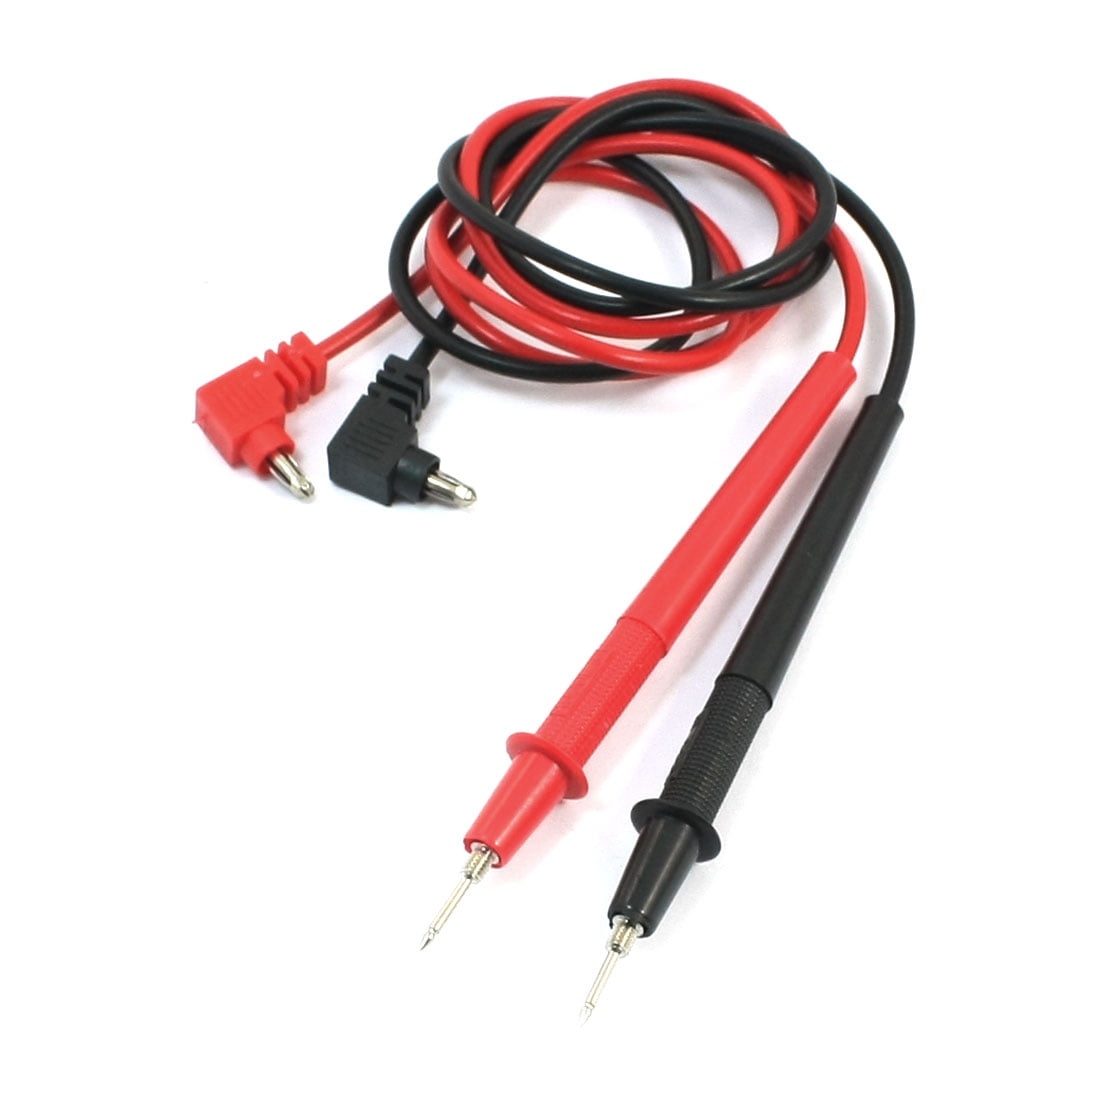 Eagle Test Probes 3' FT Multi Meter Banana Plugs Black Red Pair REPL Test Leads 